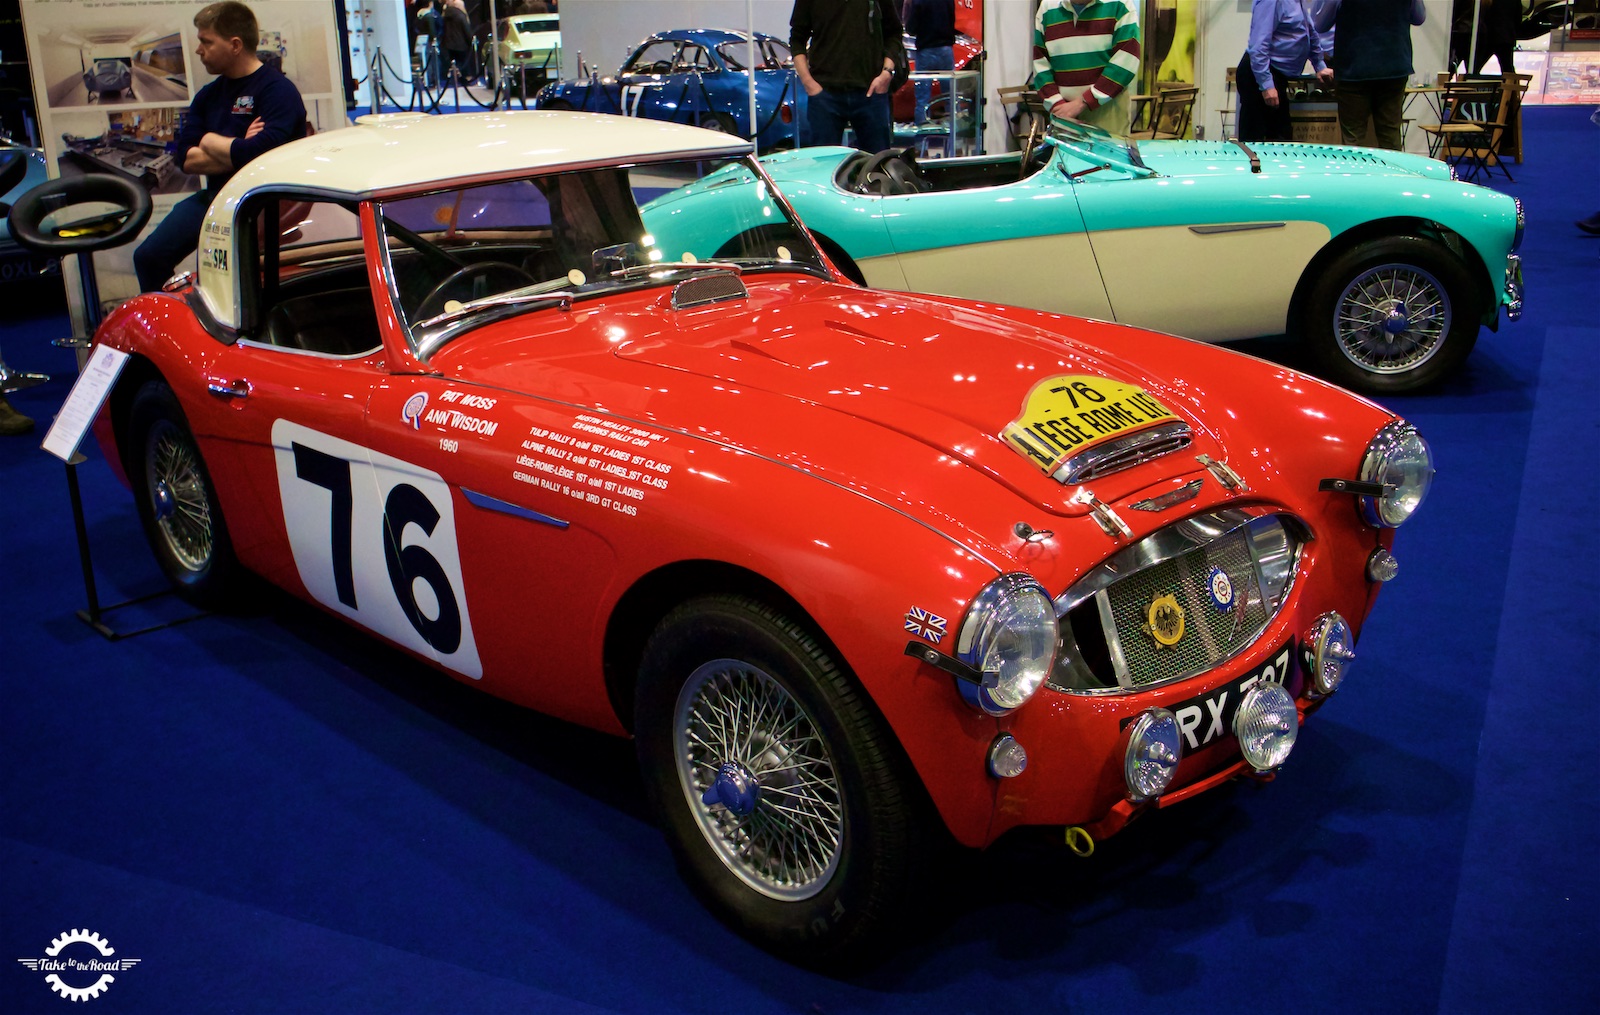 London Classic Car Show moves to the Olympia